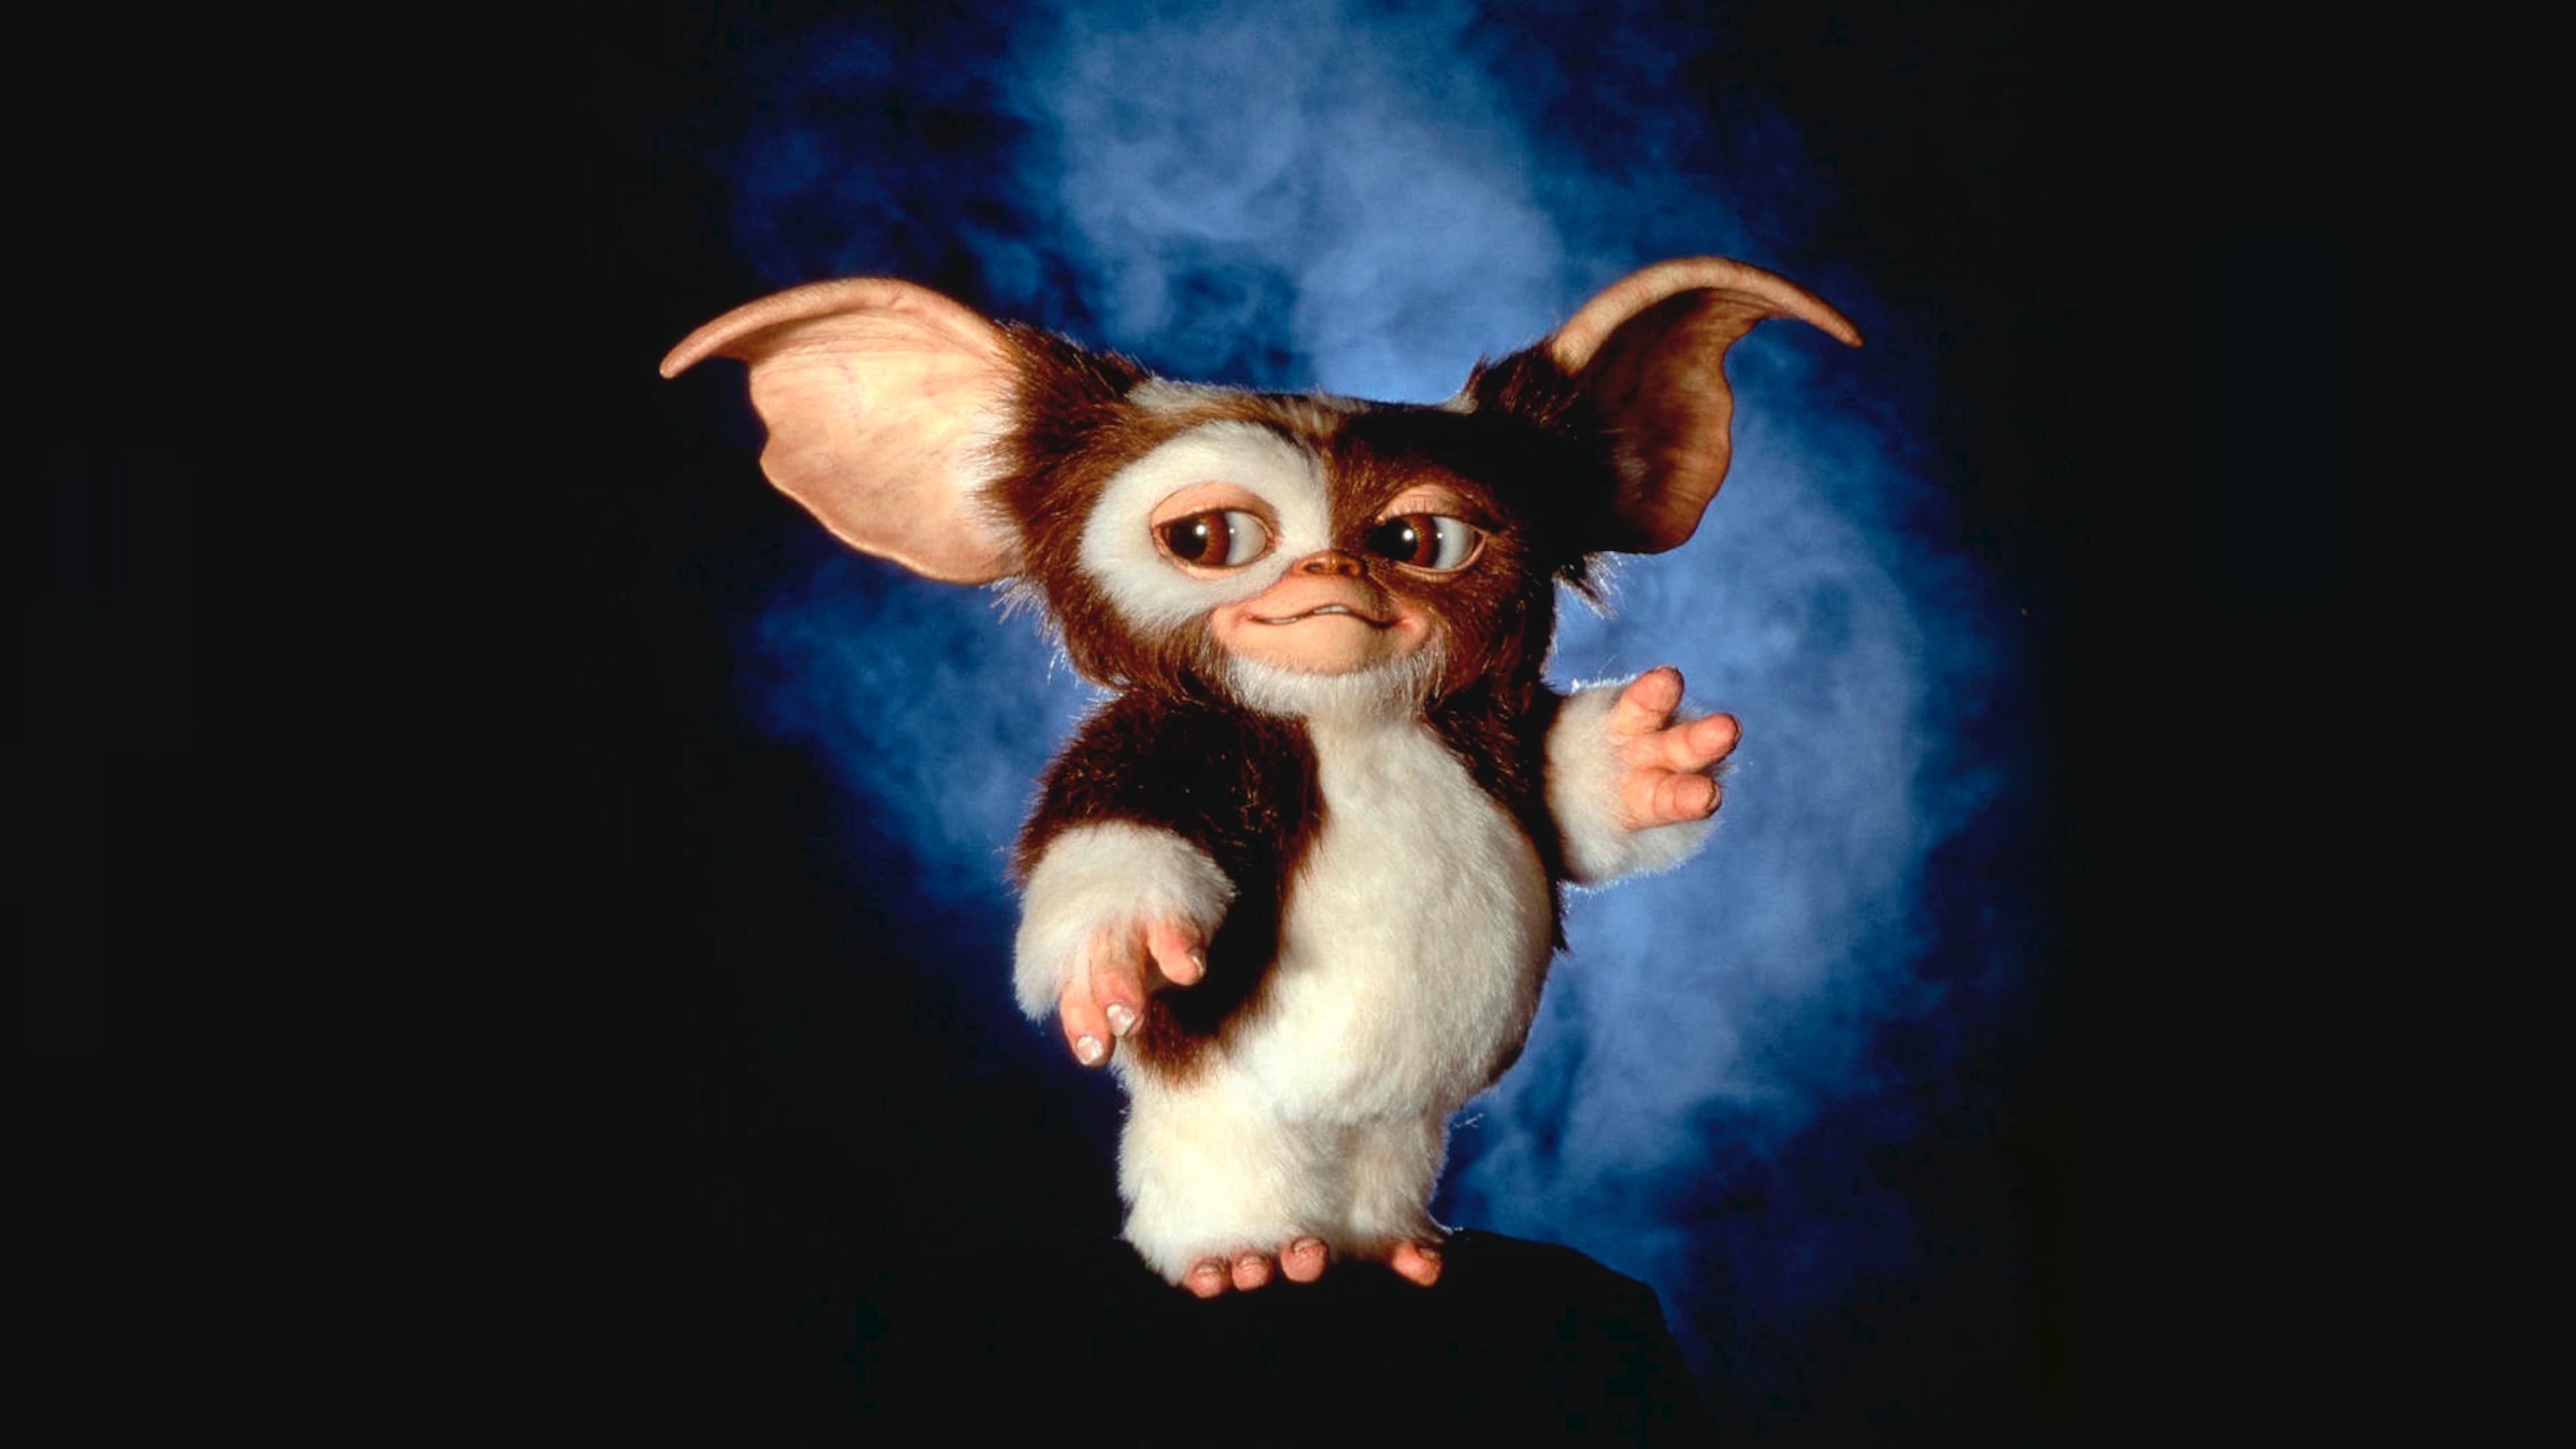 Gremlin Gizmo: Giz, An adorable, very kind Mogwai who is part of Billy Peltzer’s life. 3840x2160 4K Background.